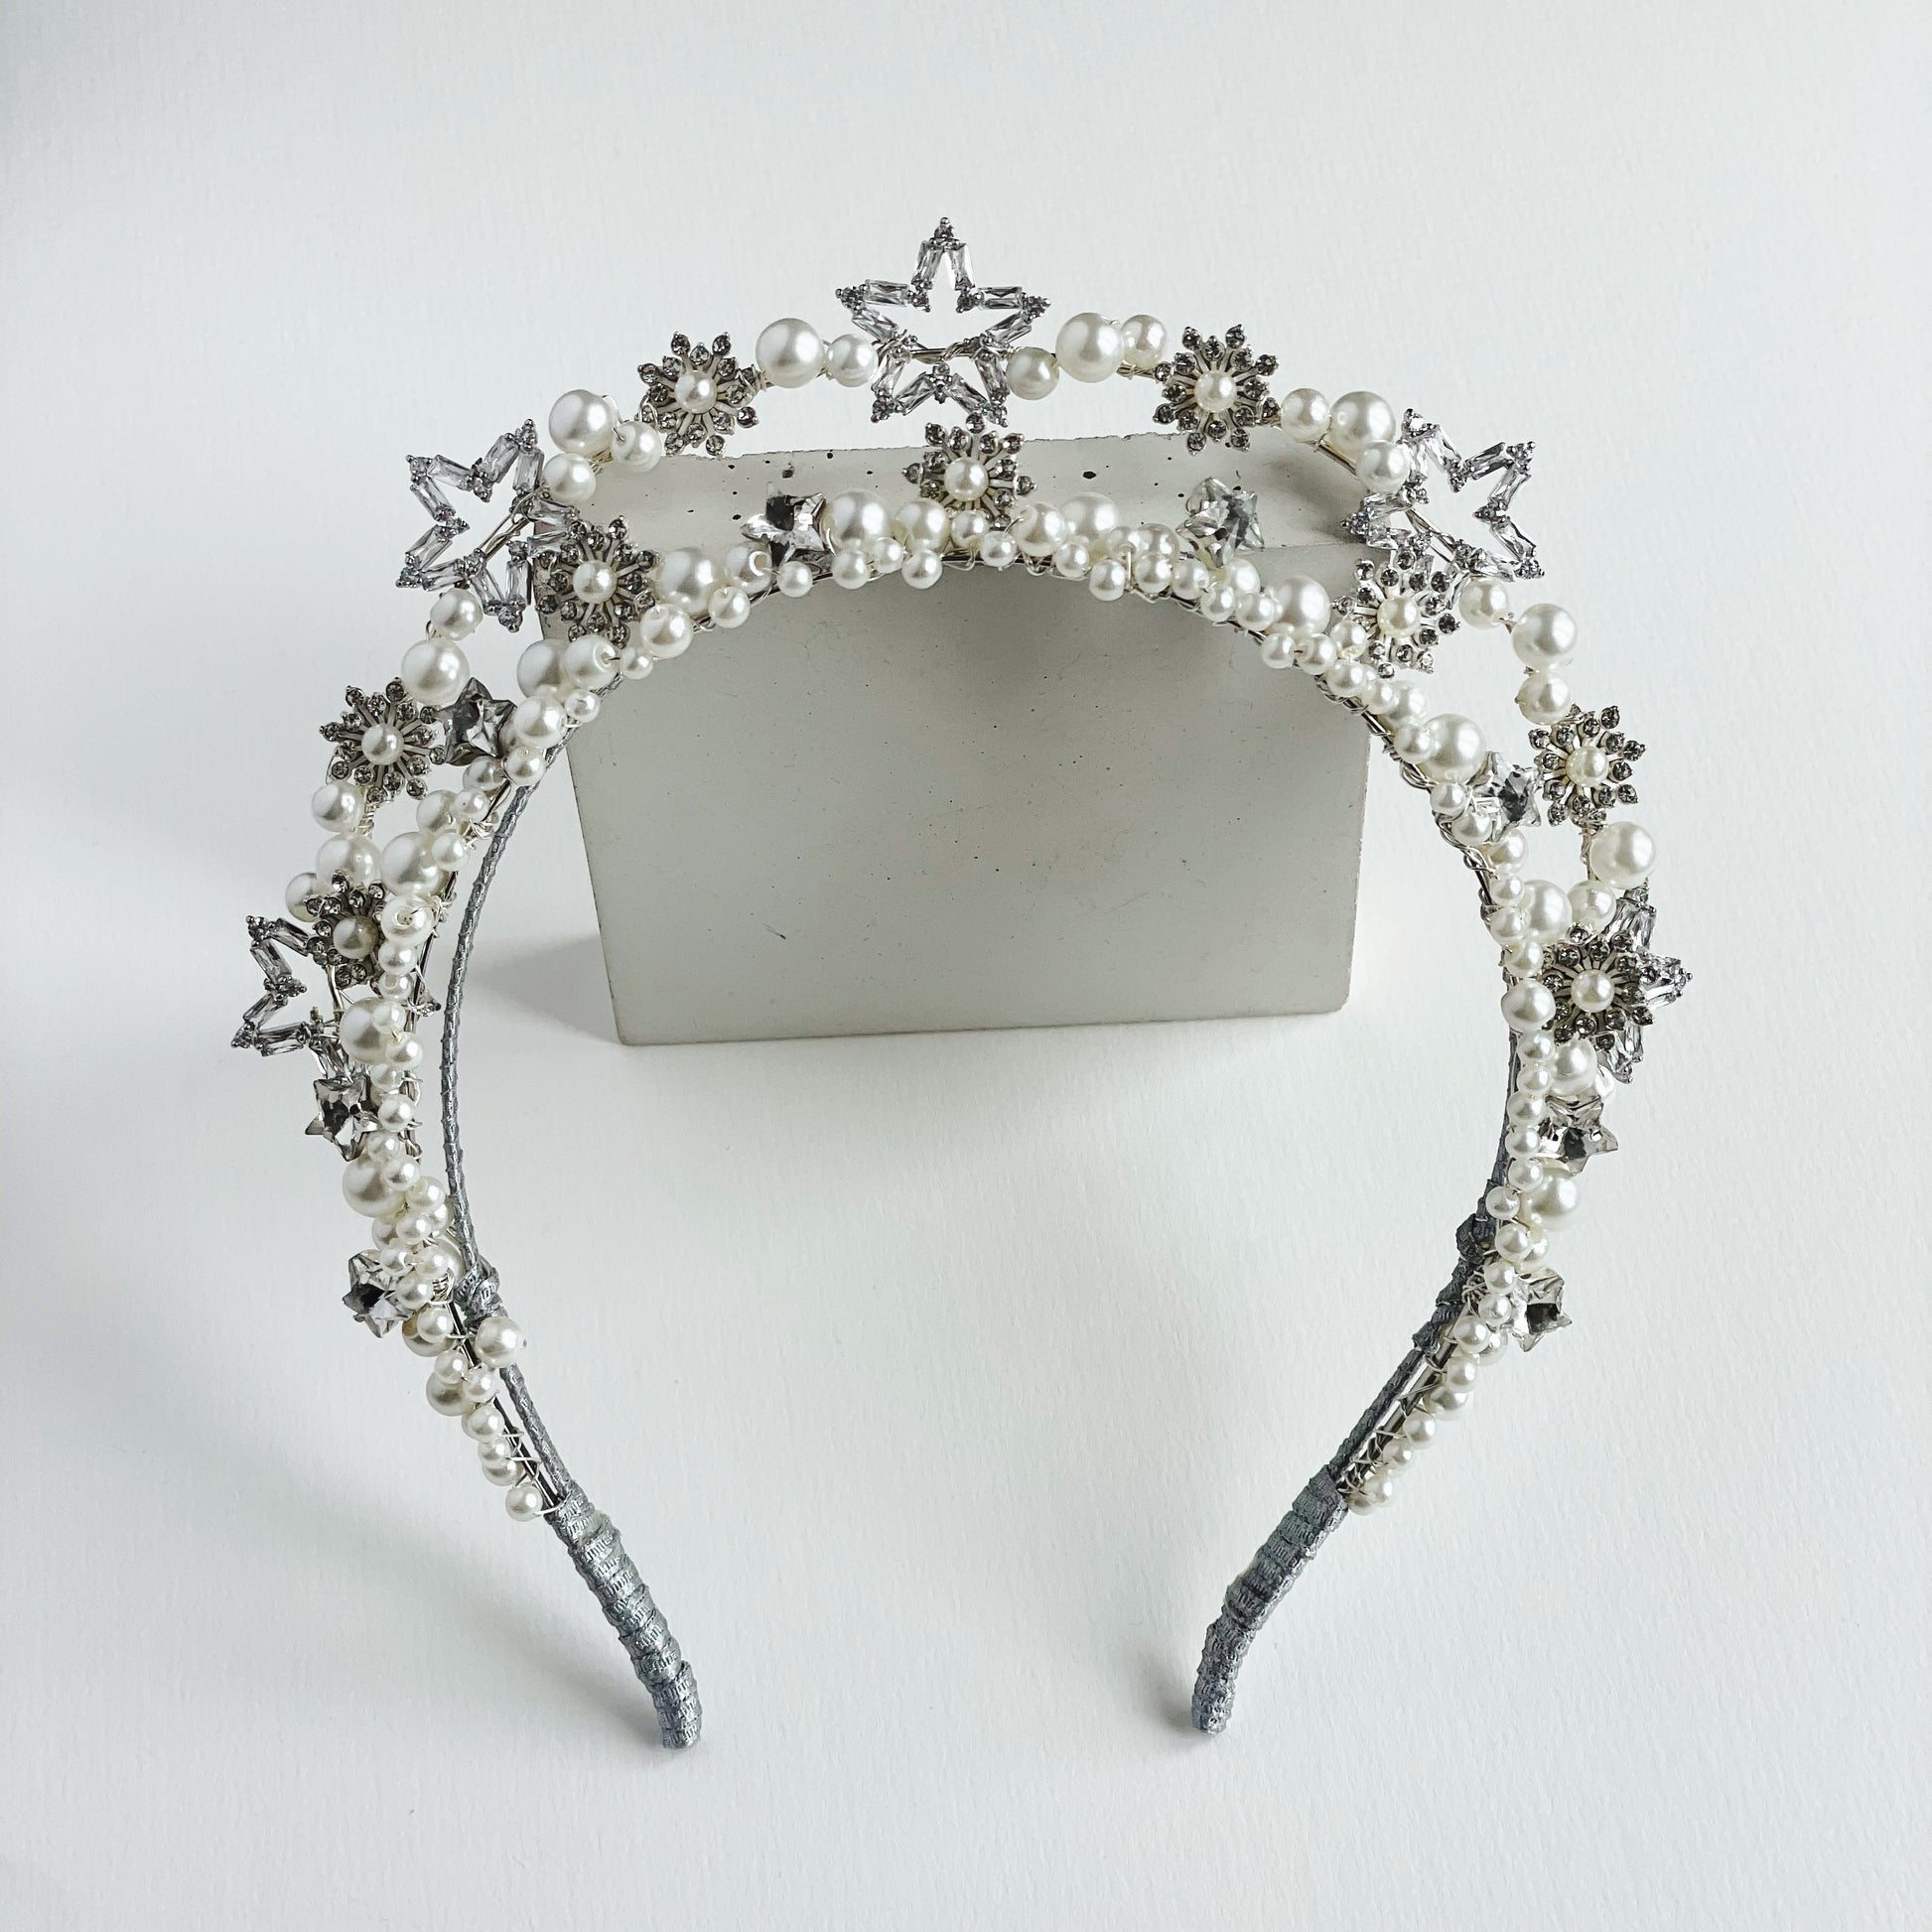 JUPITER | Statement Bridal Crown made of stars and Pearls